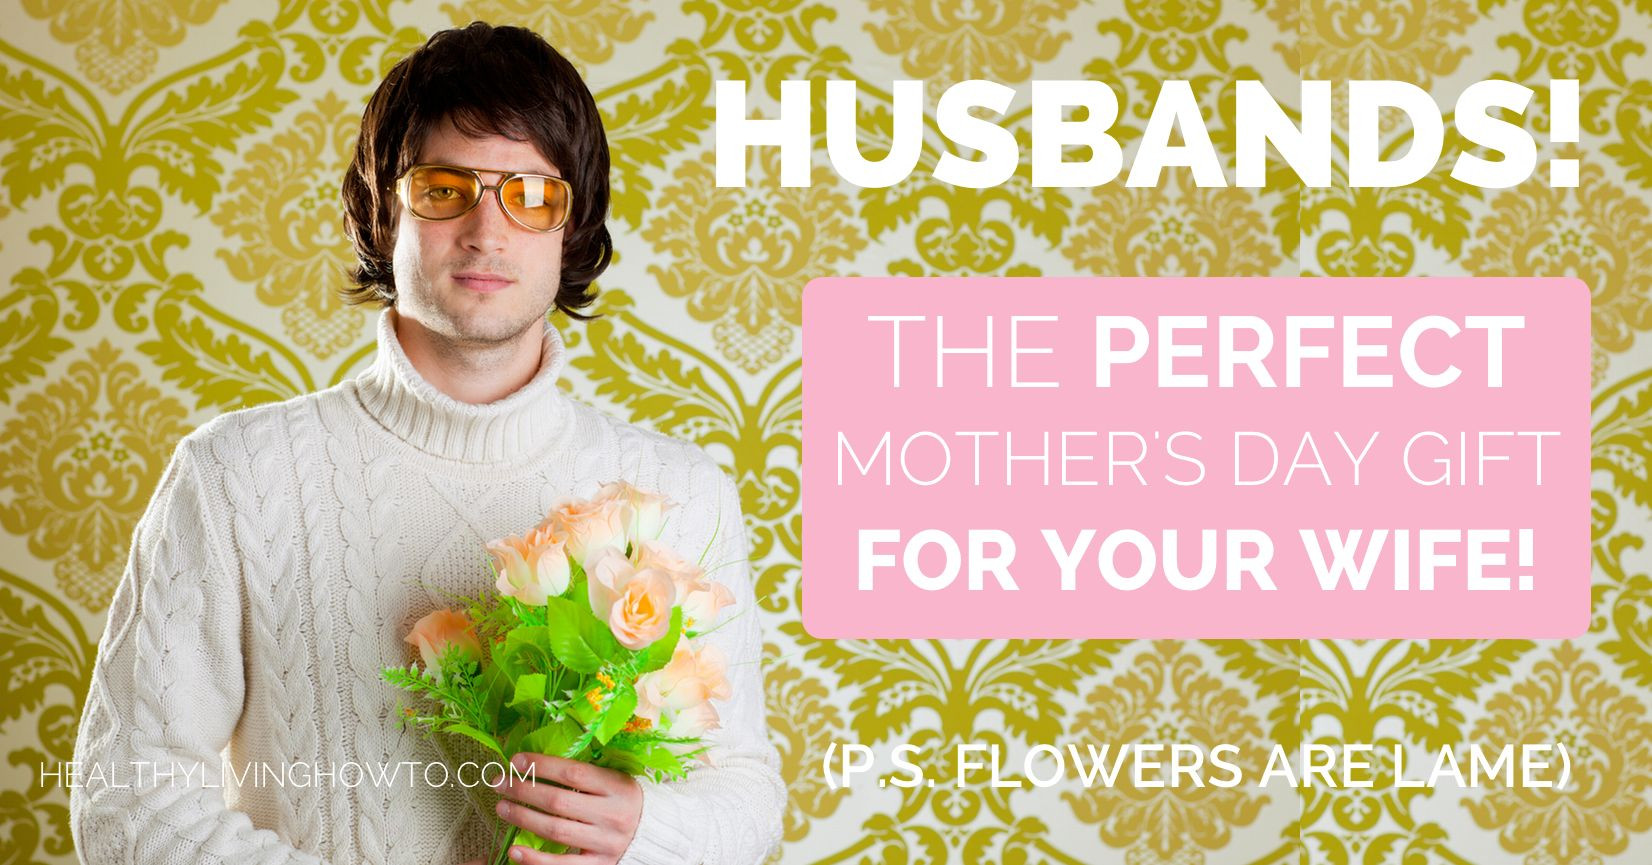 Mothers Day Gifts For Your Wife
 Husbands The Perfect Mother’s Day Gift For Your Wife P